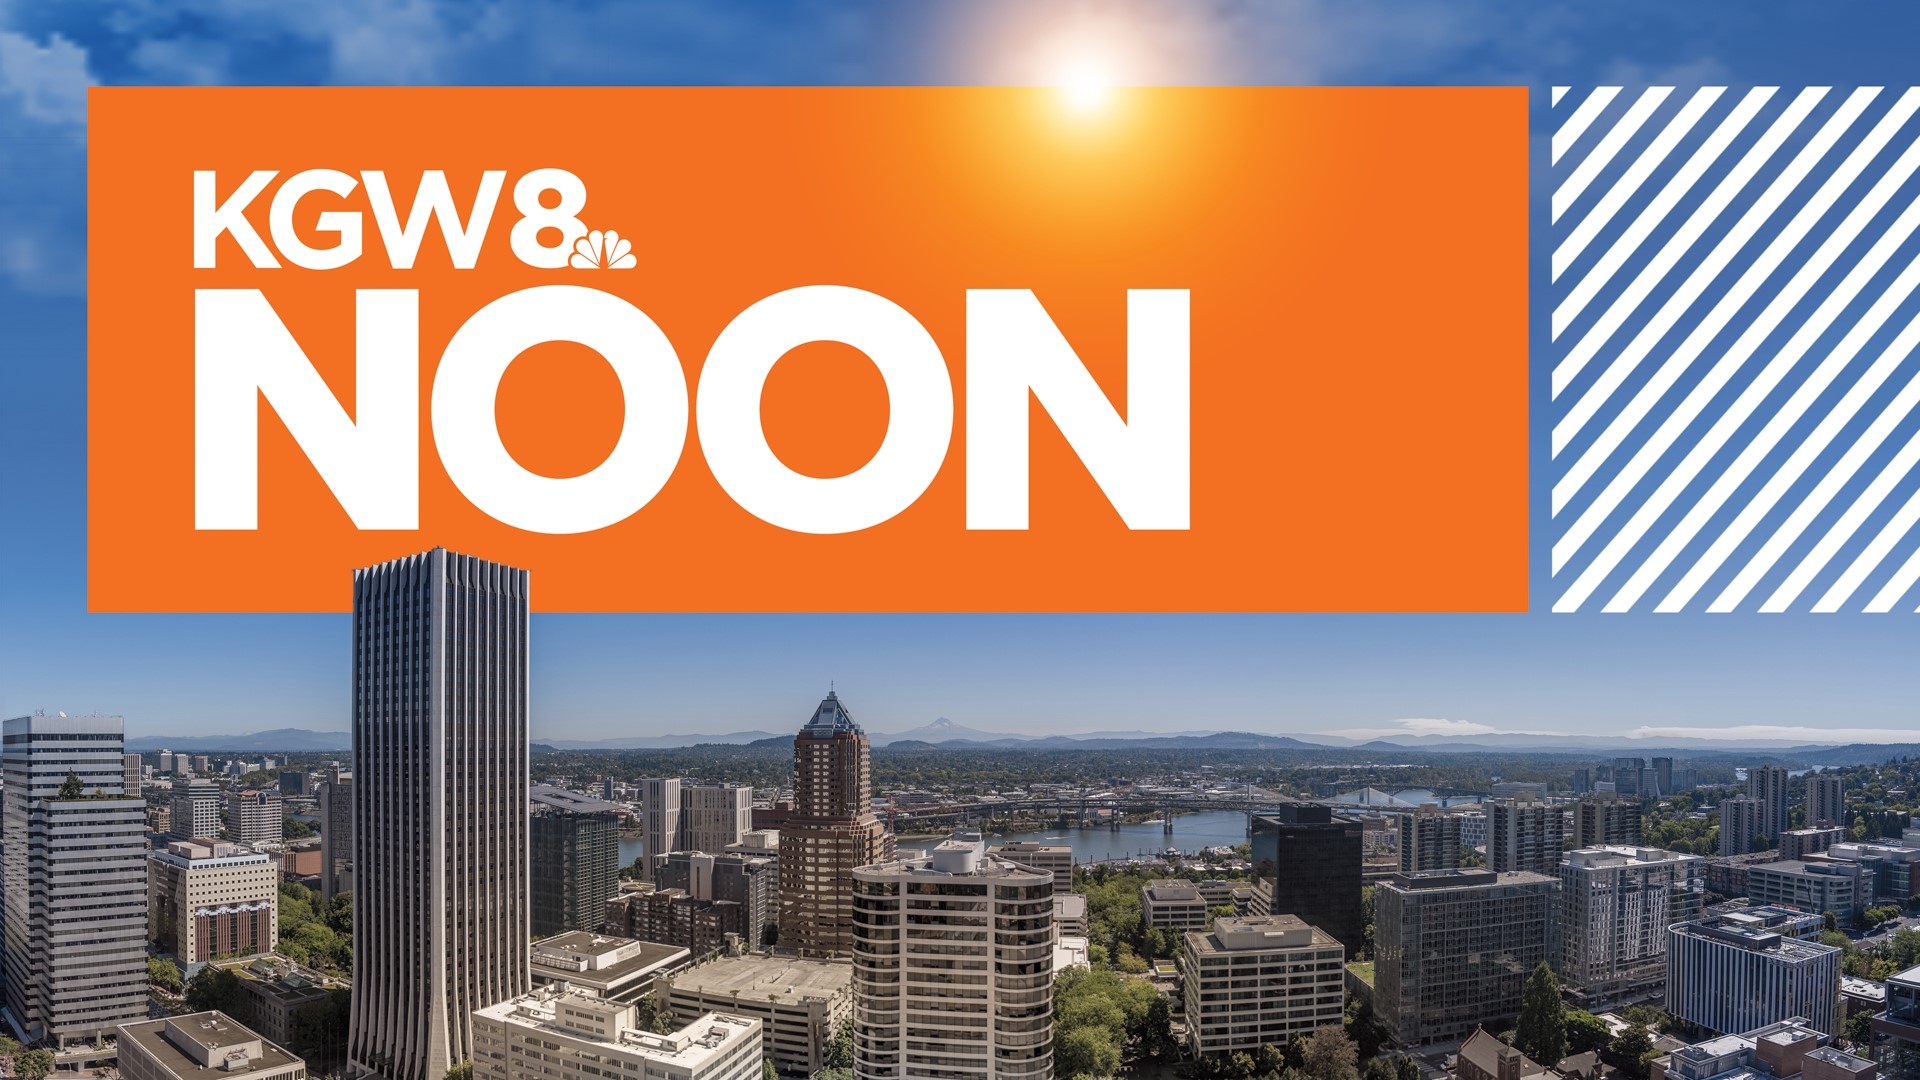 Developing news and the afternoon weather forecast from KGW